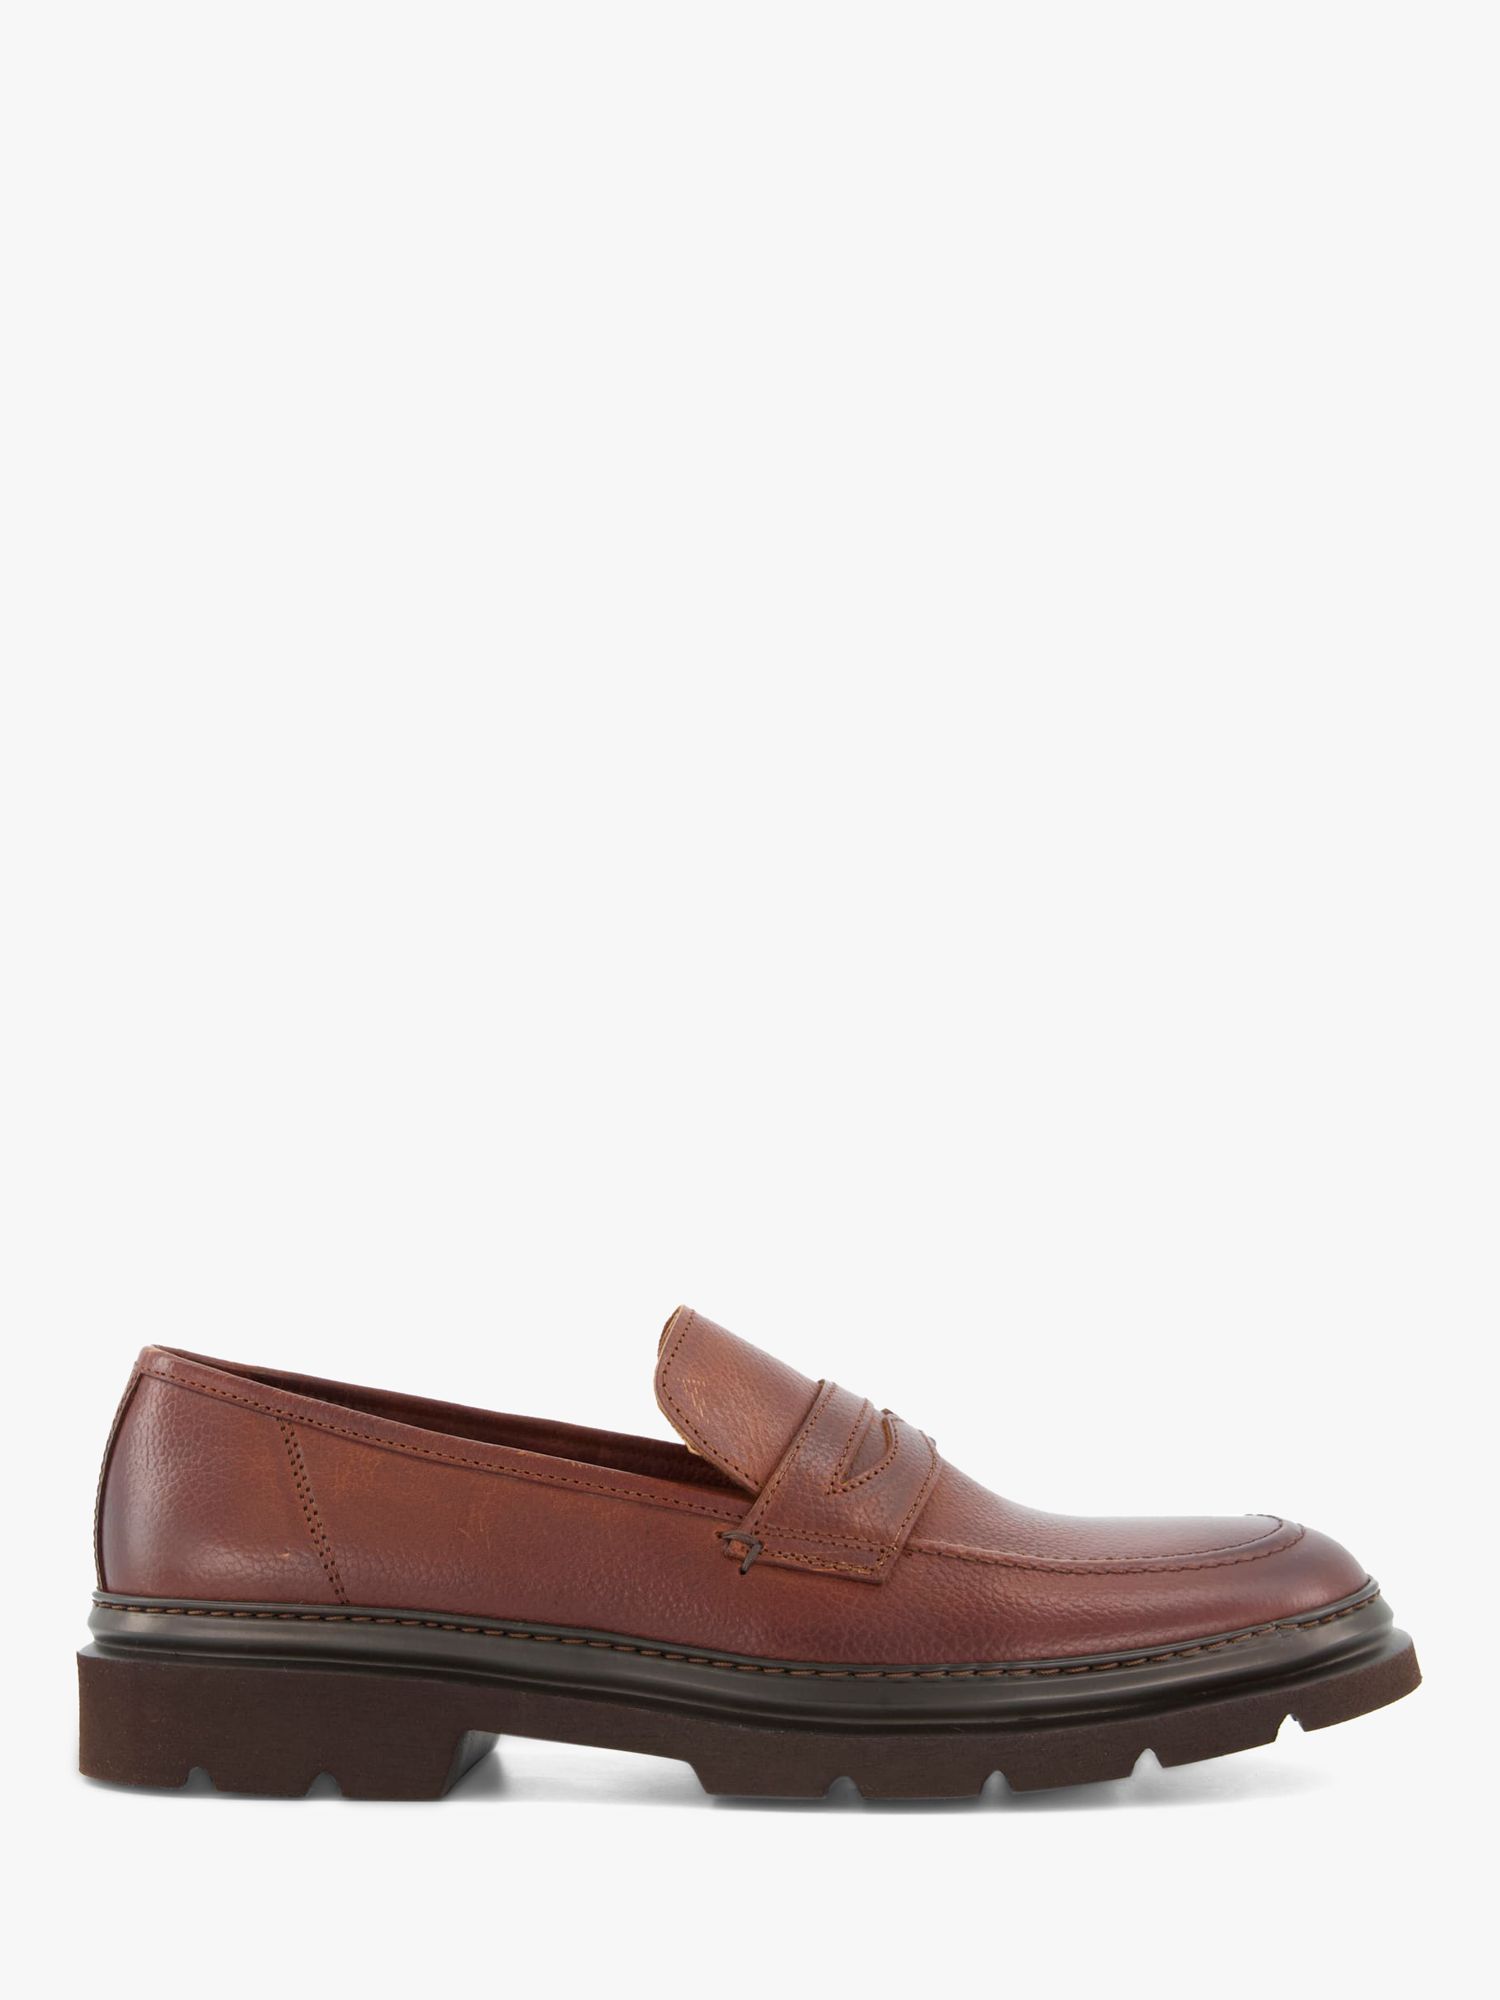 Dune Bolted Leather Penny Loafers